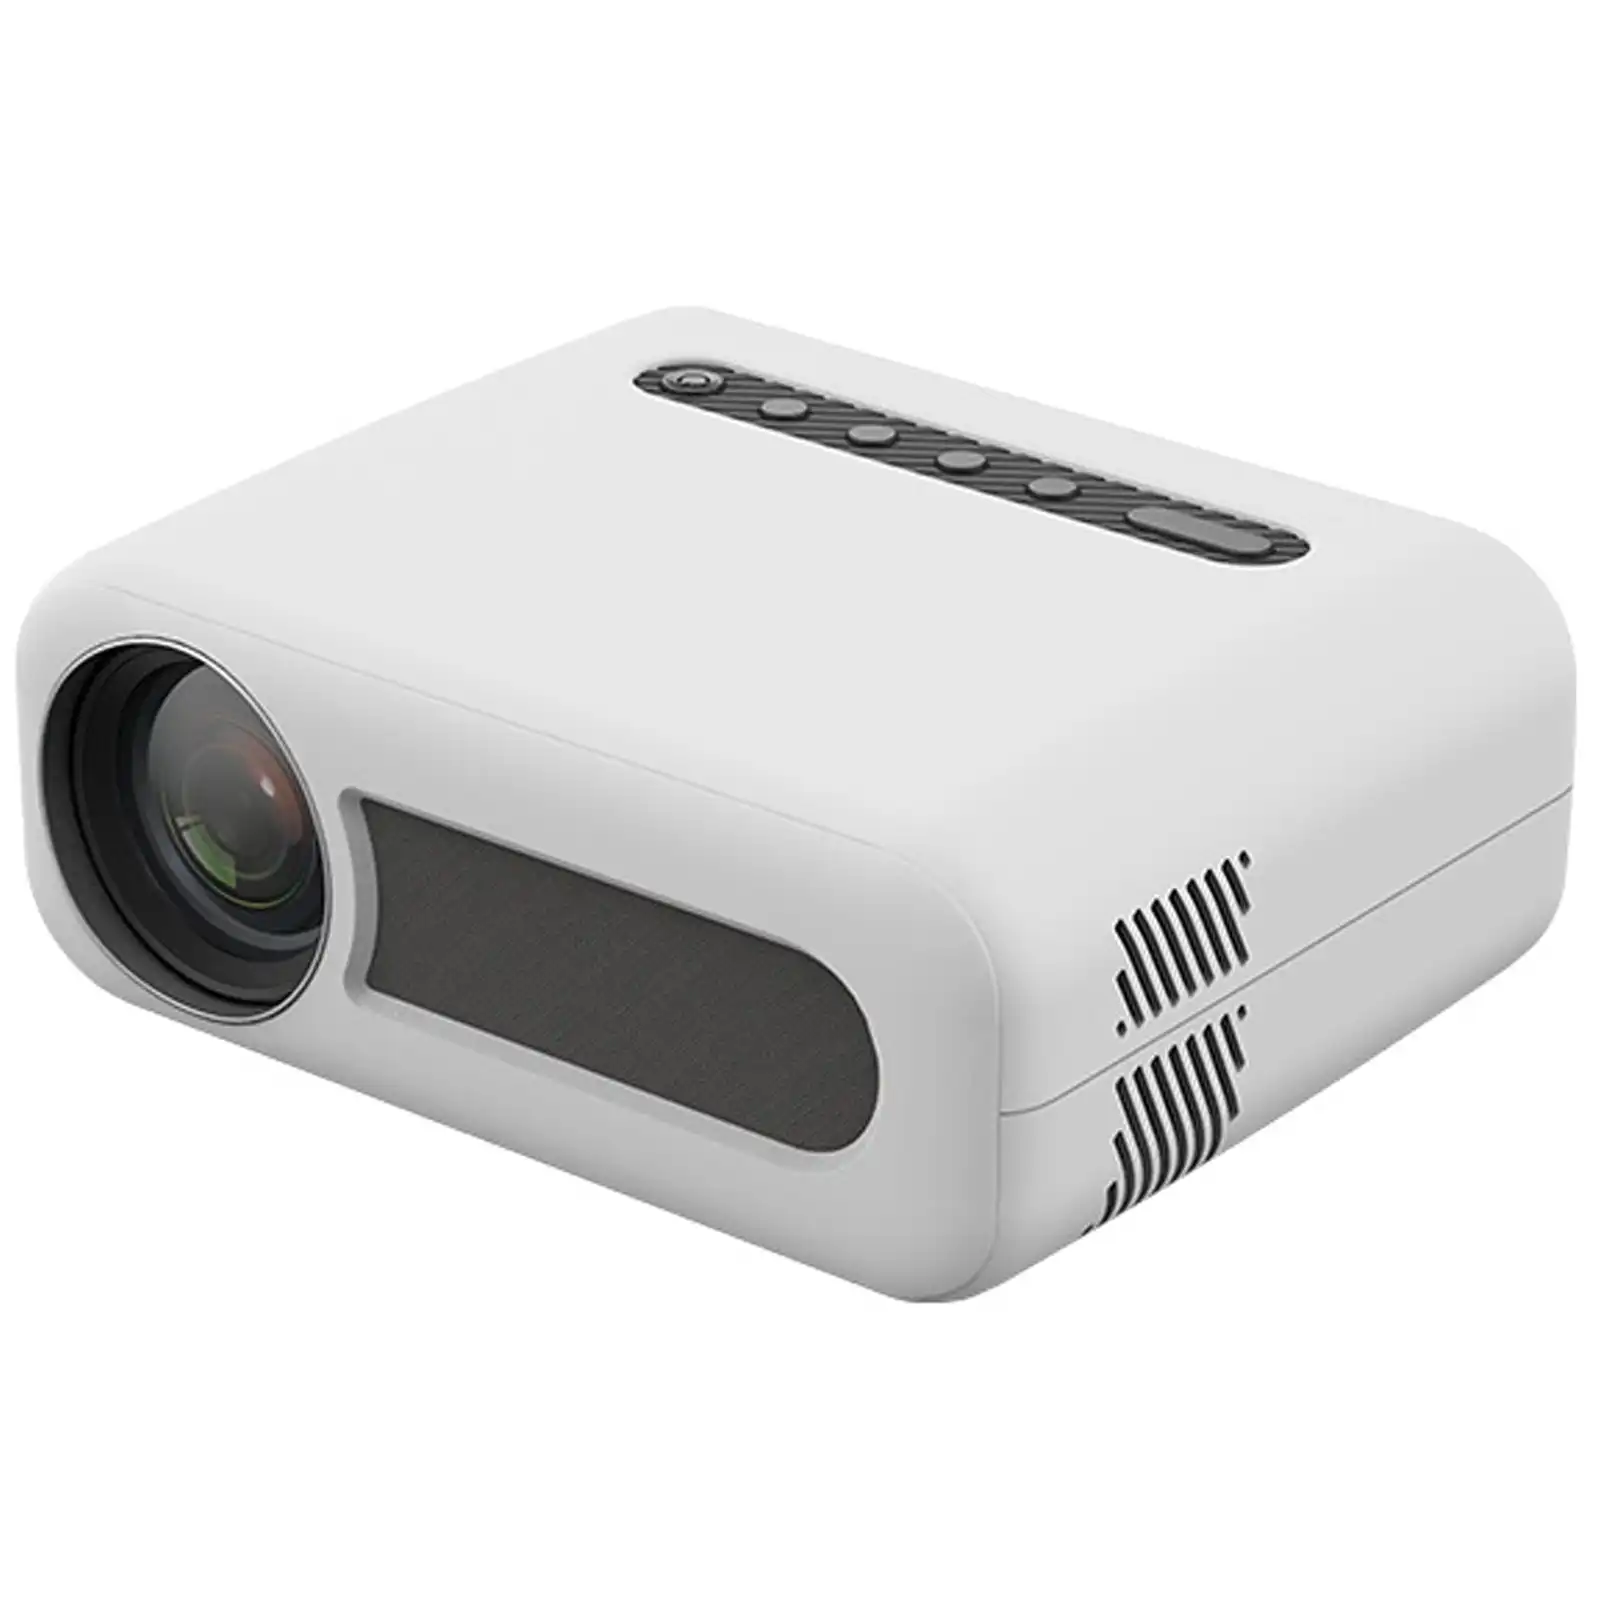 TODO Mini LED Home Theatre Projector MiraCast Airplay Function Full HD 1920x1080 100 ANSI Lumens Remote